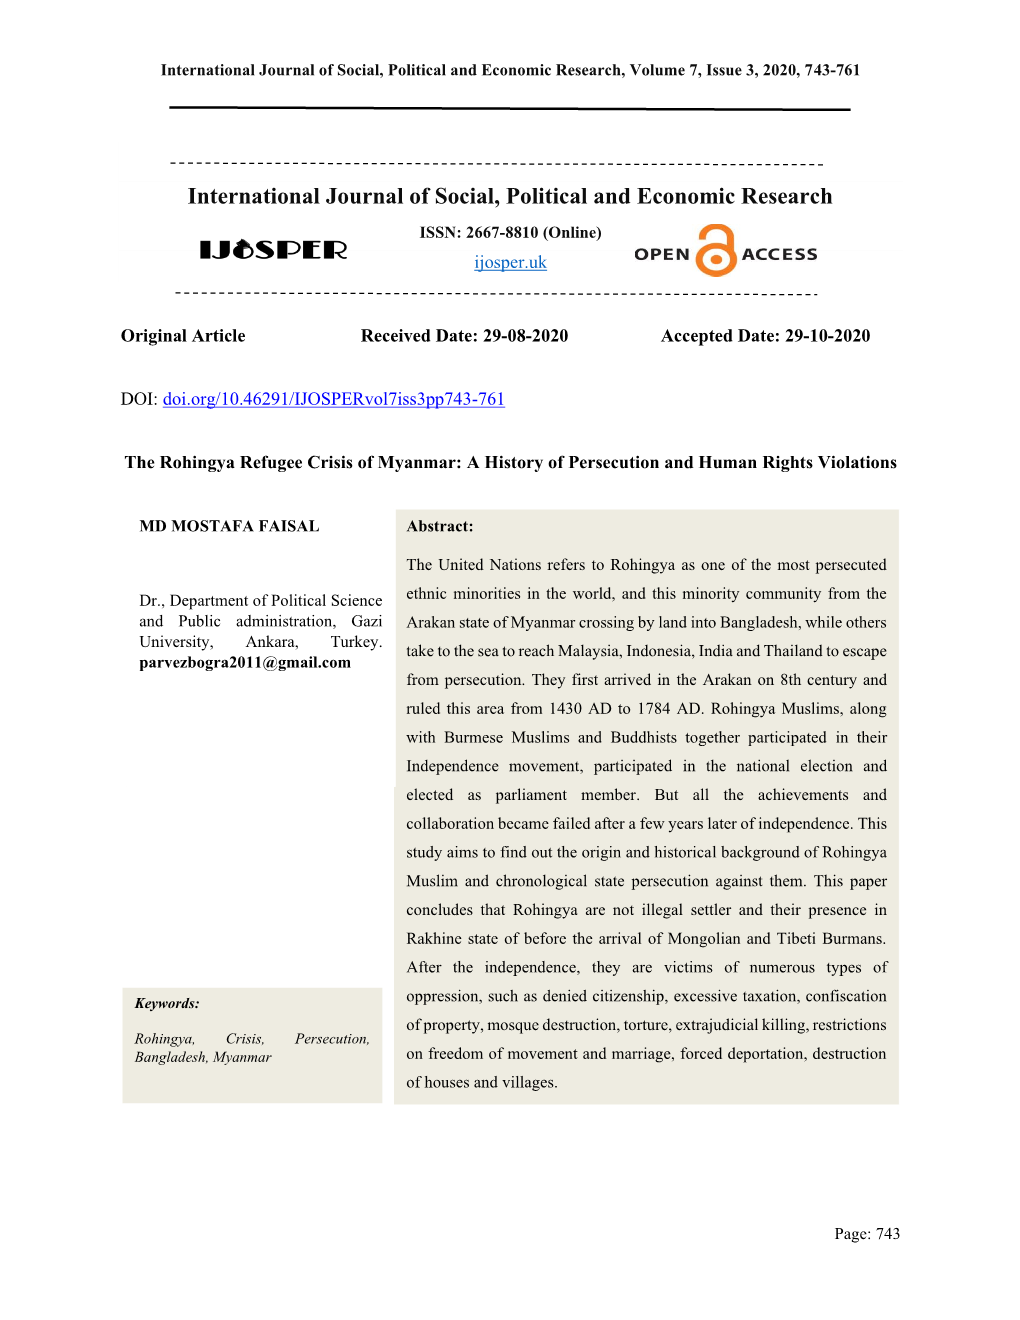 International Journal of Social, Political and Economic Research, Volume 7, Issue 3, 2020, 743-761